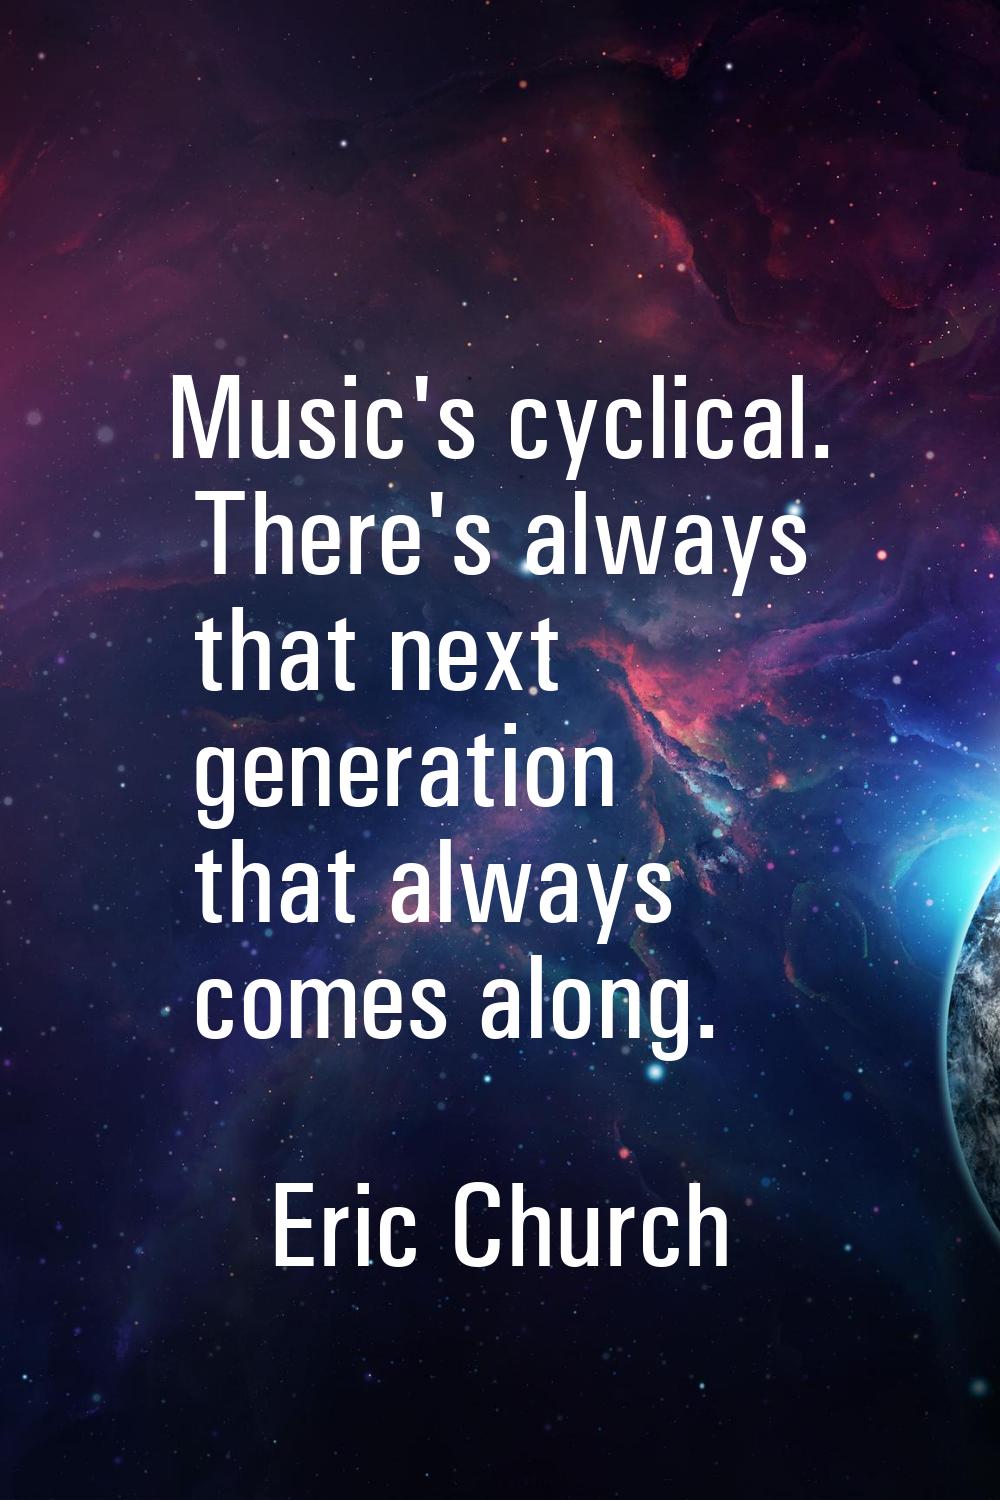 Music's cyclical. There's always that next generation that always comes along.